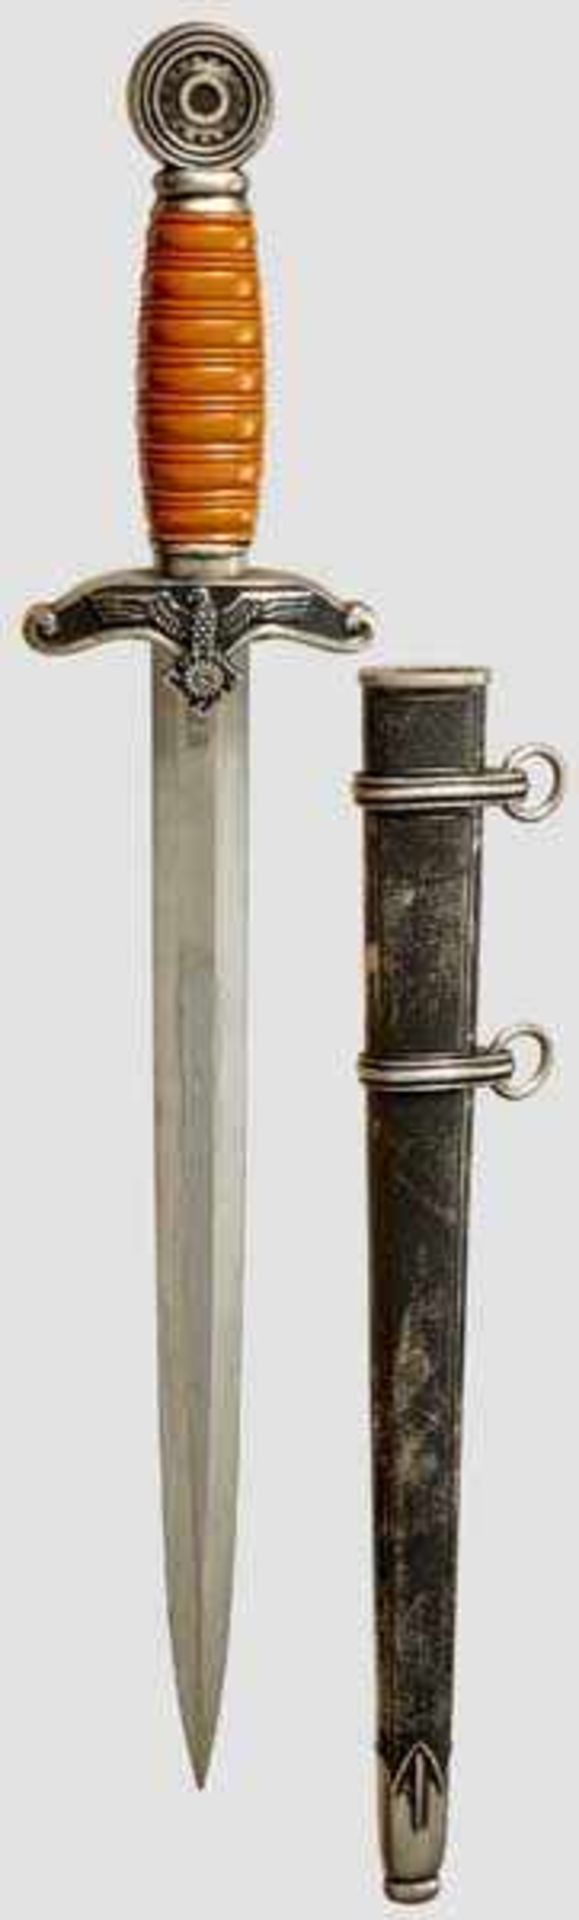 A Model 1938 Dagger for Leaders of the TENO (Technical Emergency Corps) Maker Carl Eickhorn,